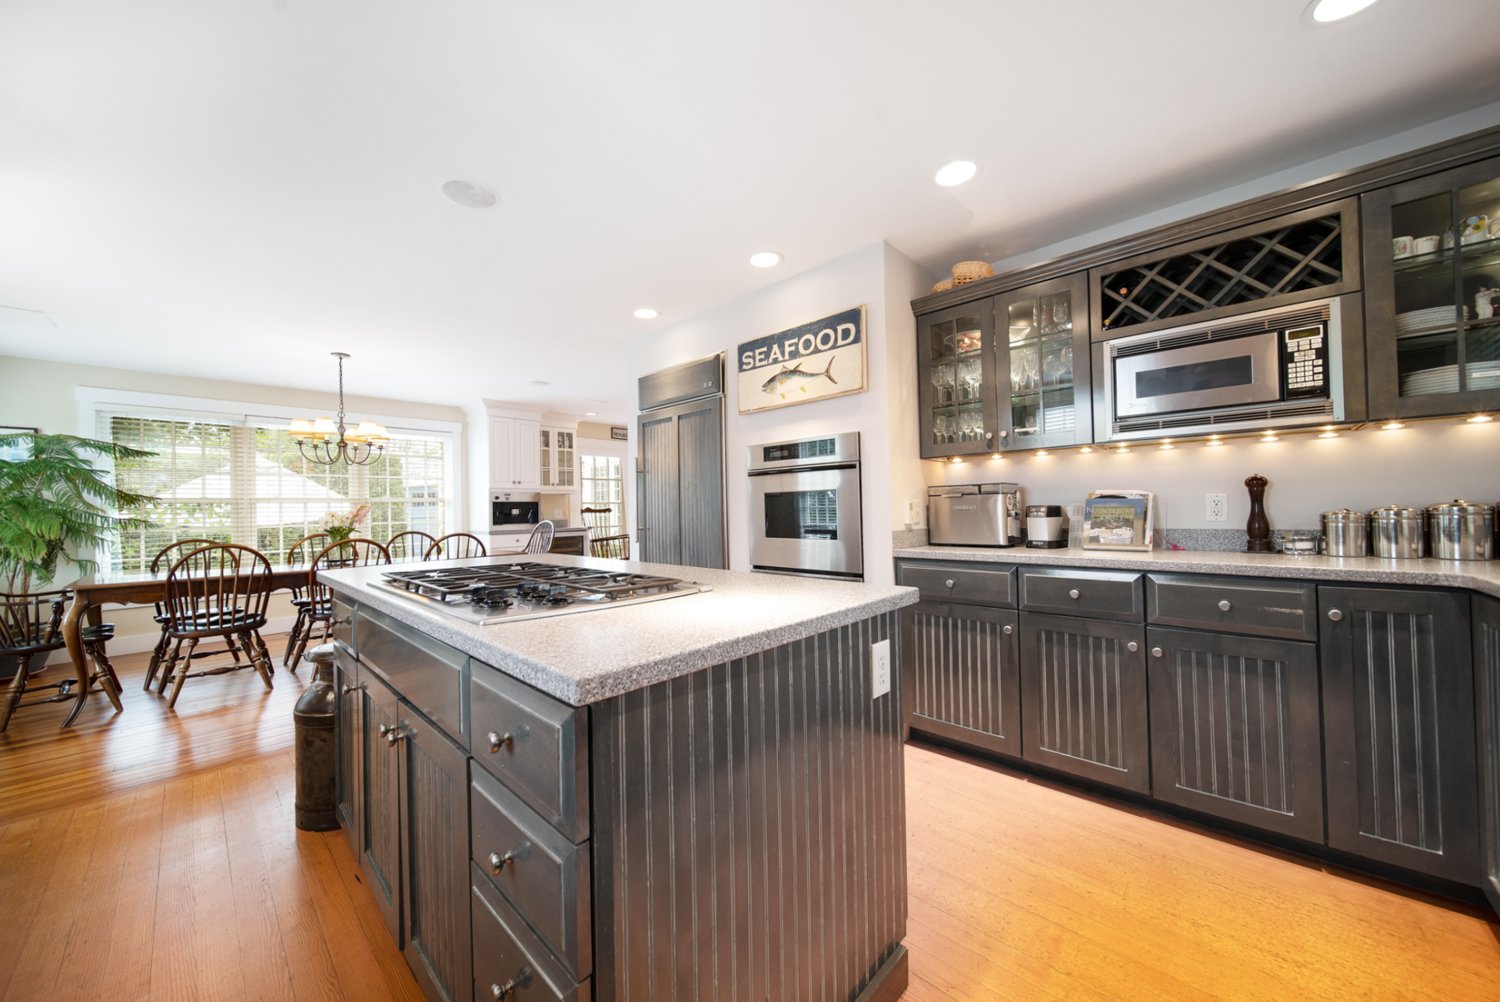 The open kitchen has a central island with cooktop, multiple cabinets for storage, a pantry and high-end appliances by Sub-Zero and Thermador.